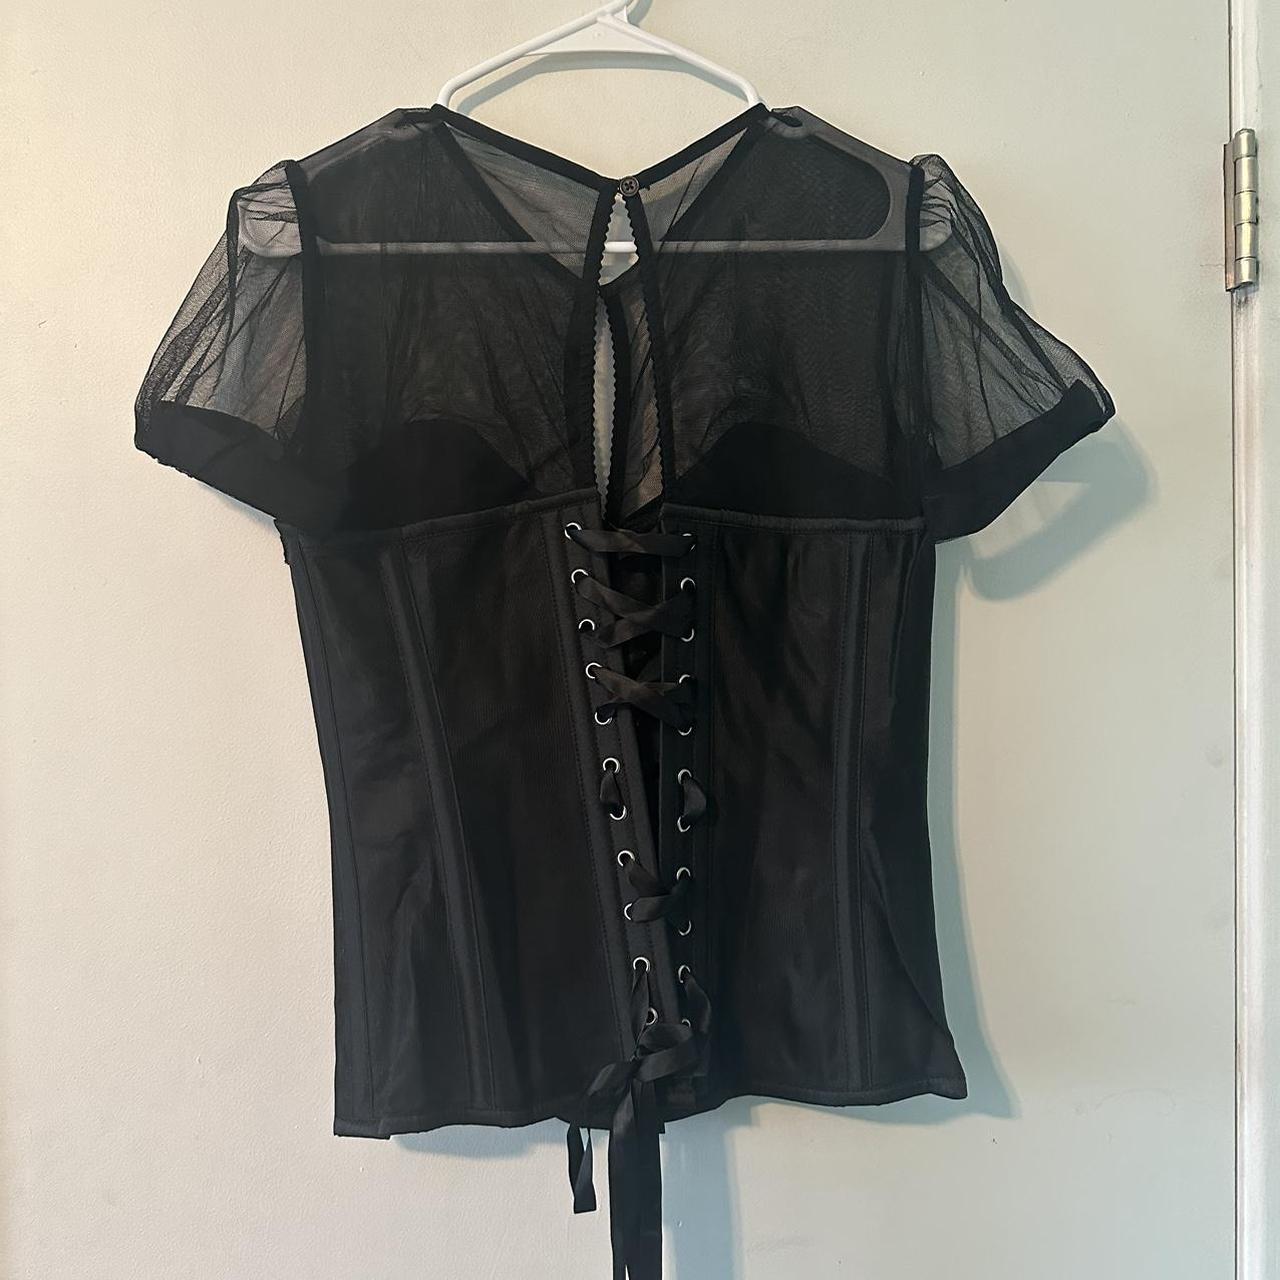 INSTANT SHAPE BLACK MESH CORSET WITH SEMI-SHEER SLEEVES